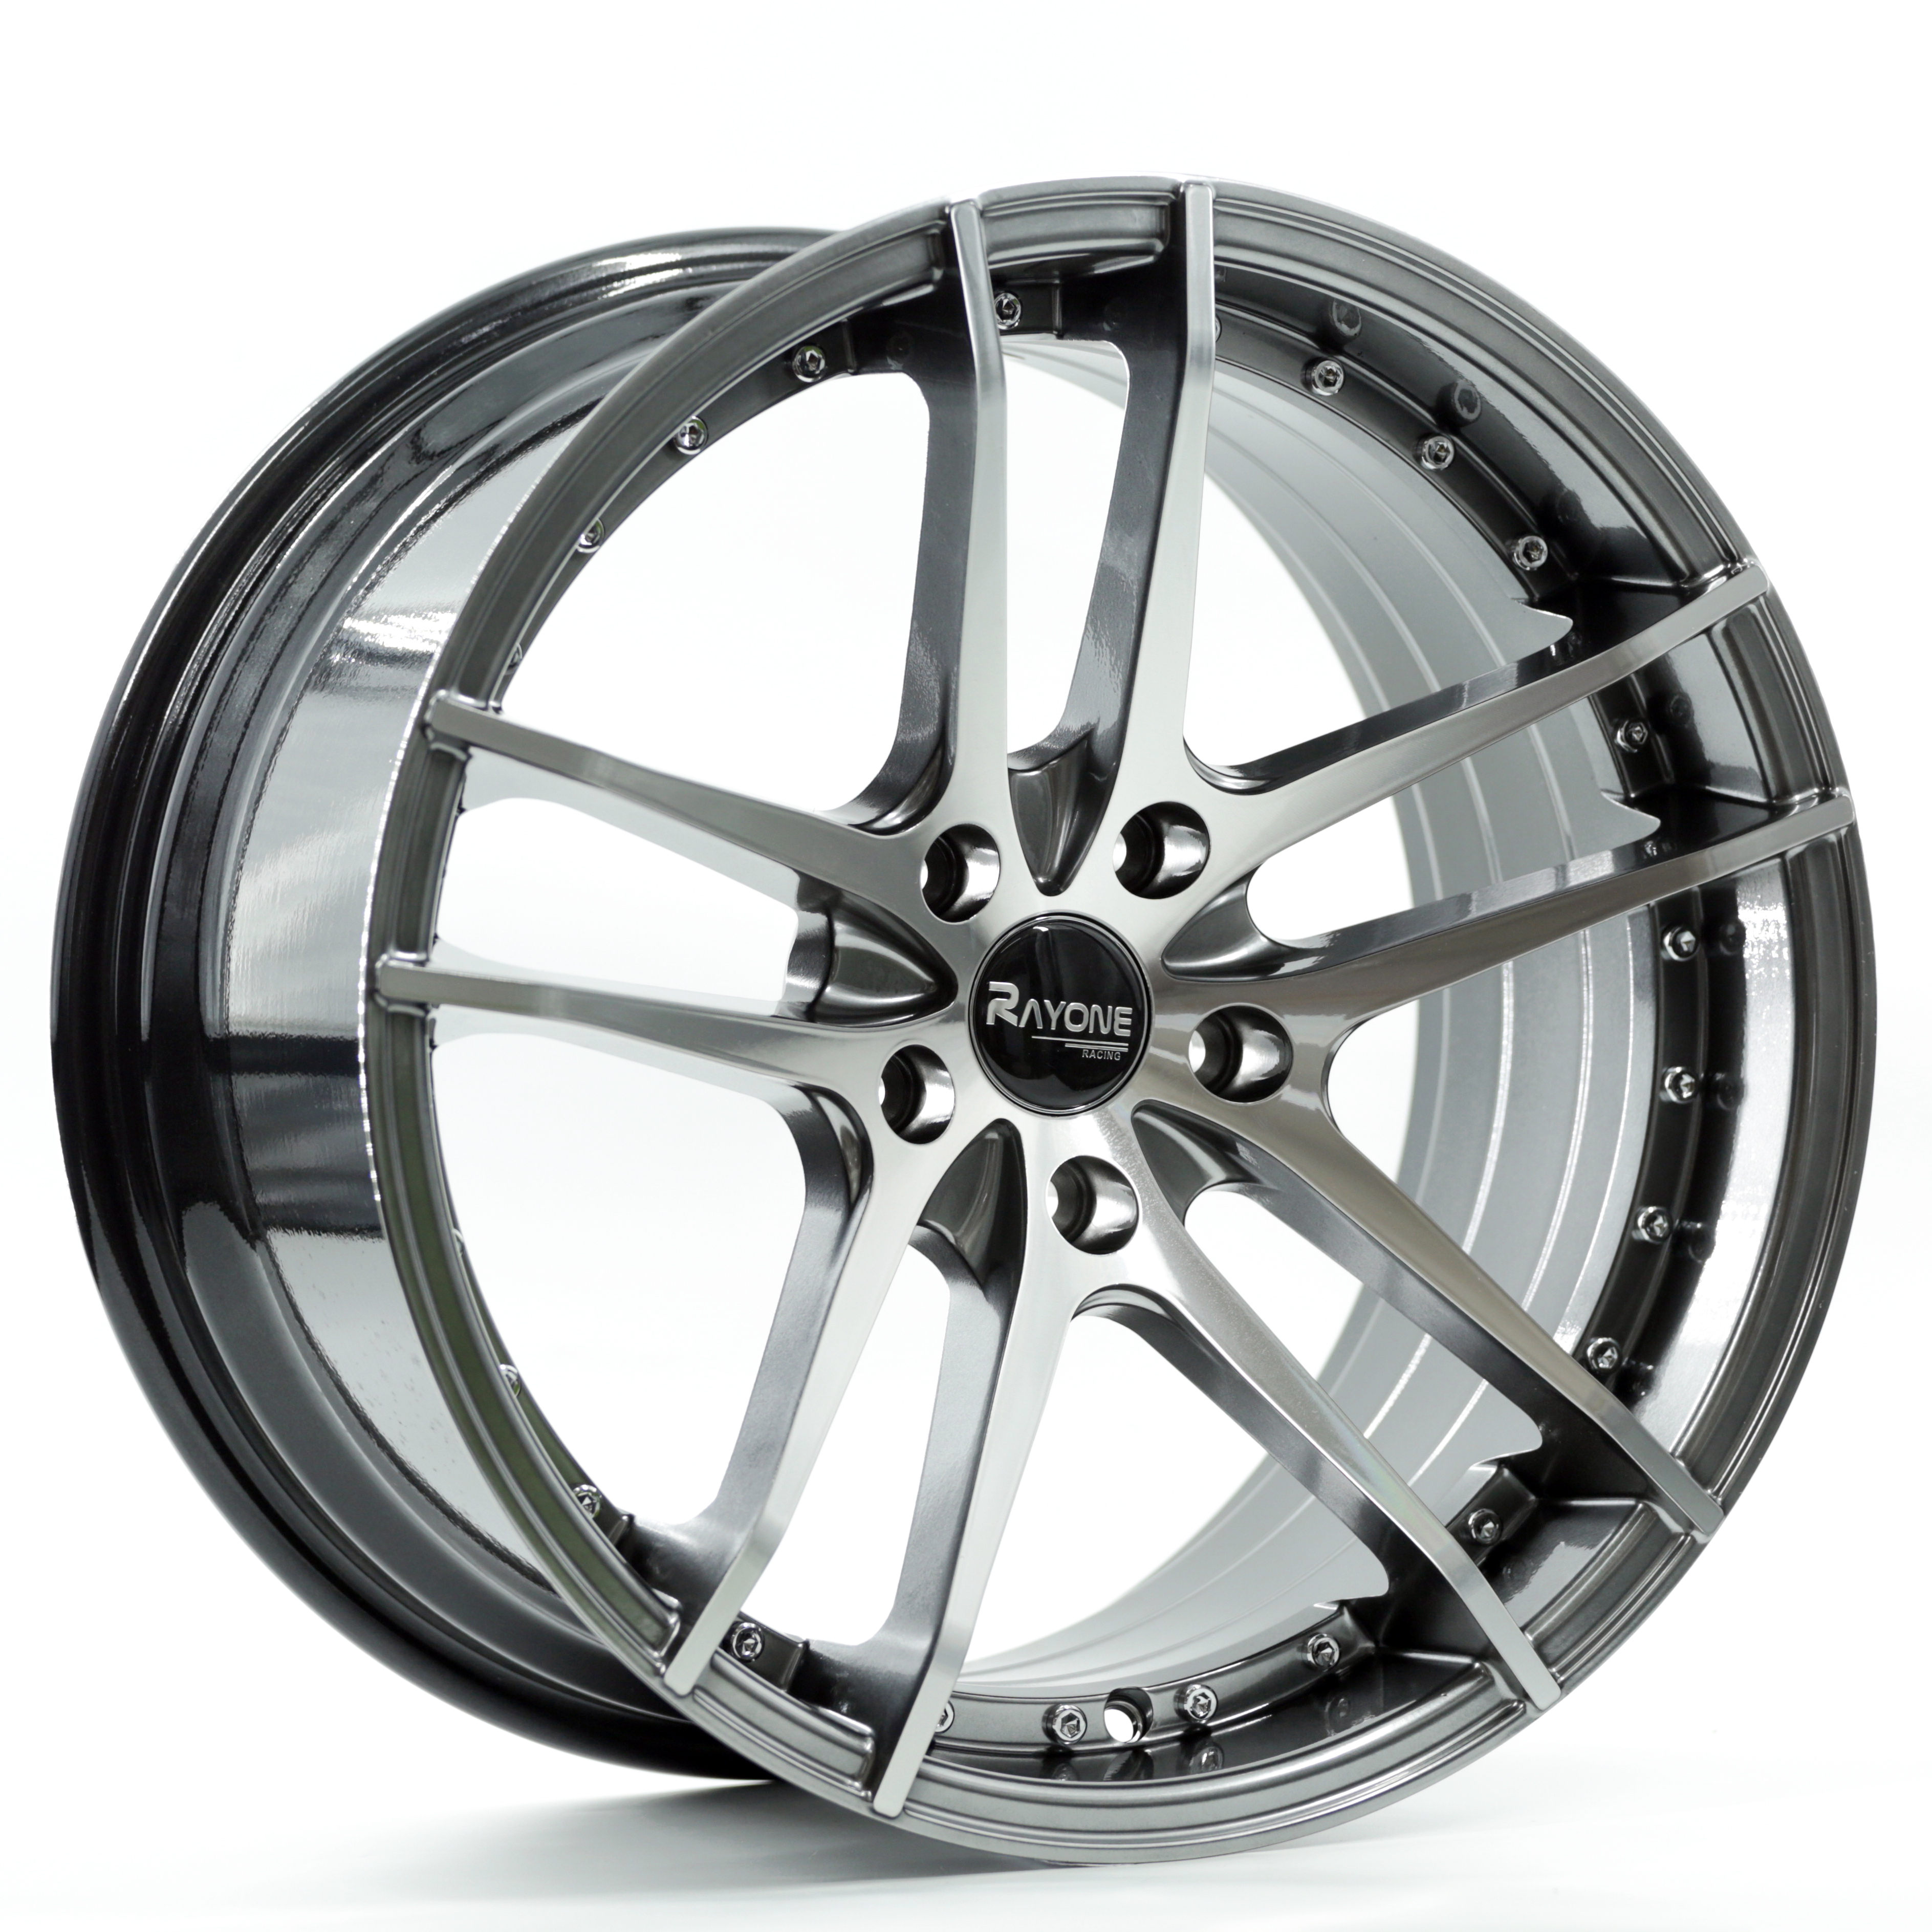 Rayone Alloy Wheels Factory KS Forged Wheels 18inch For Passenger Car Featured Image